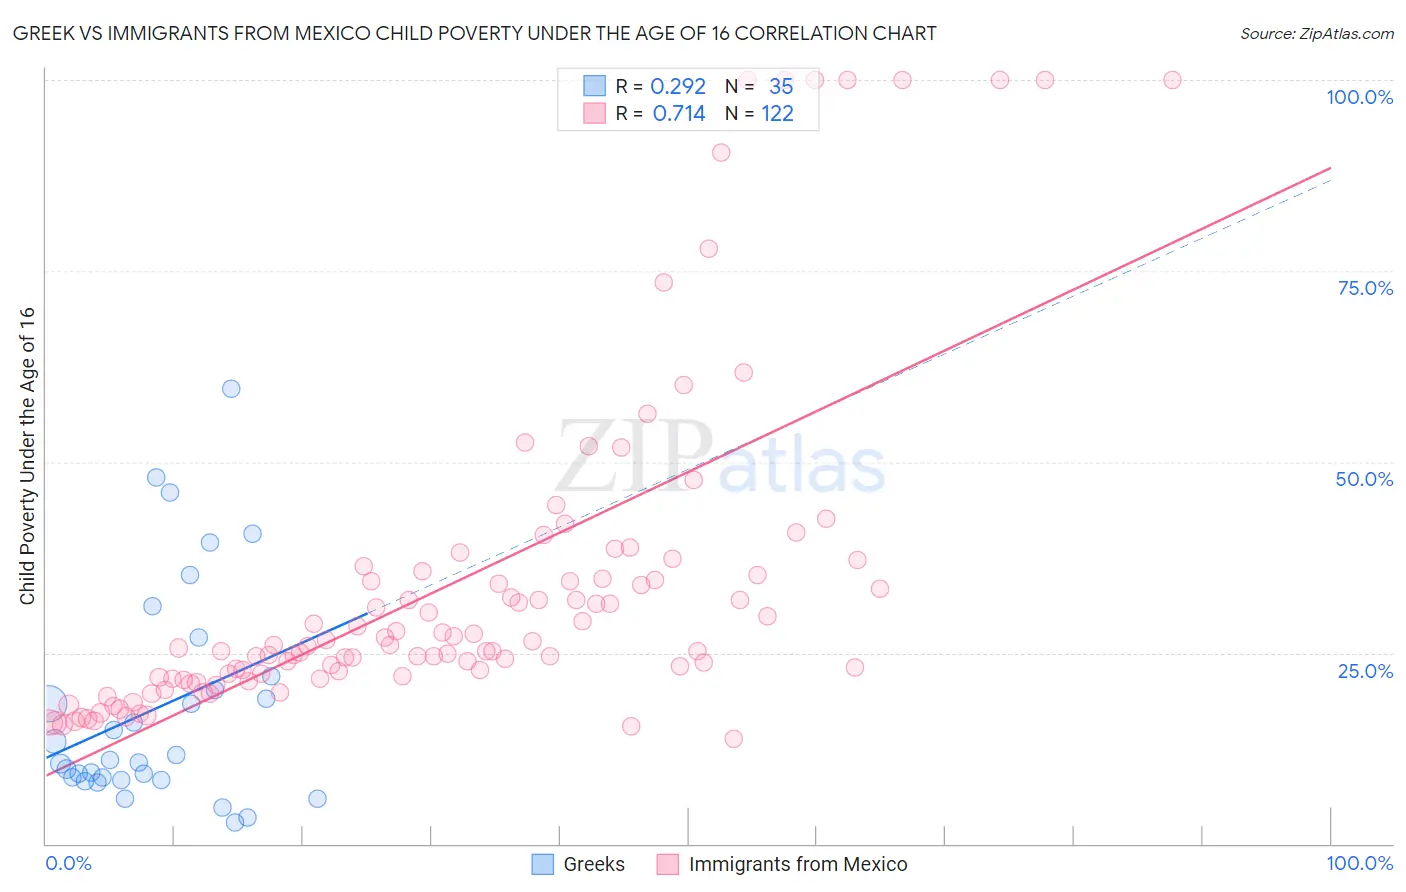 Greek vs Immigrants from Mexico Child Poverty Under the Age of 16